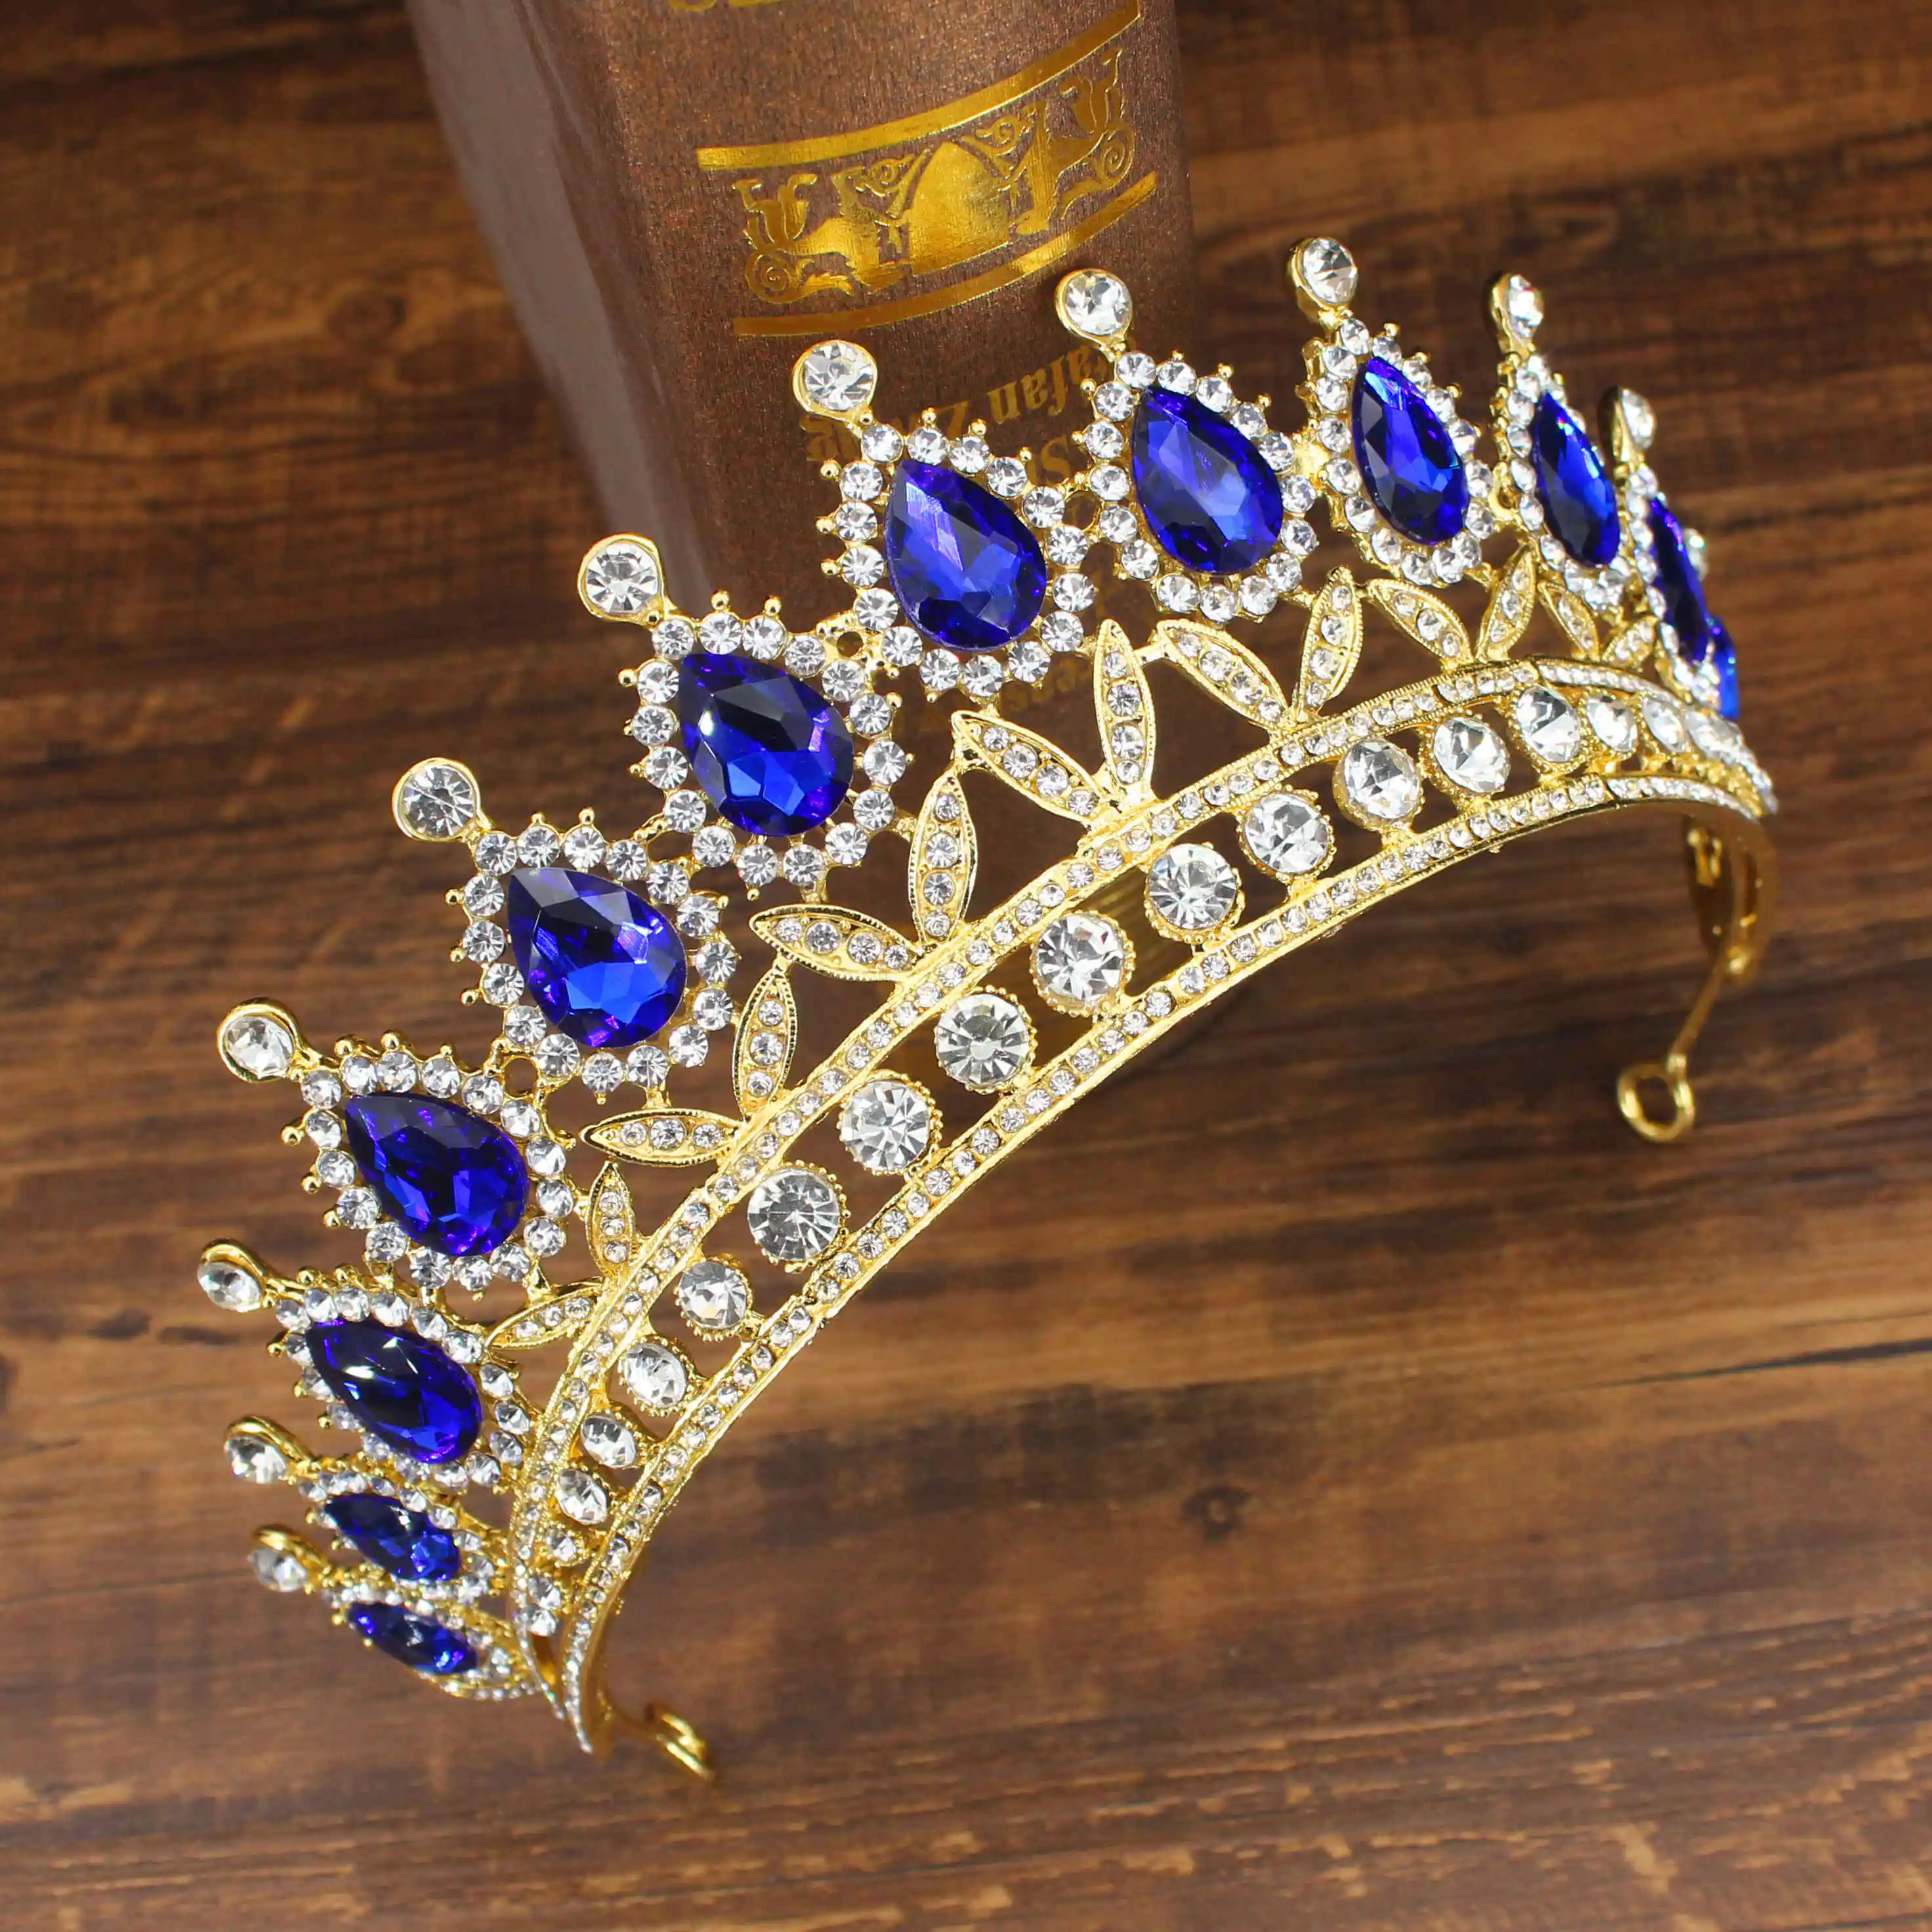 Crystal Queen Tiara Crown Wedding Bridal Diadem For Women Head Jewelry Accessories Lady Hair Ornaments Bride Pageant Headpiece 